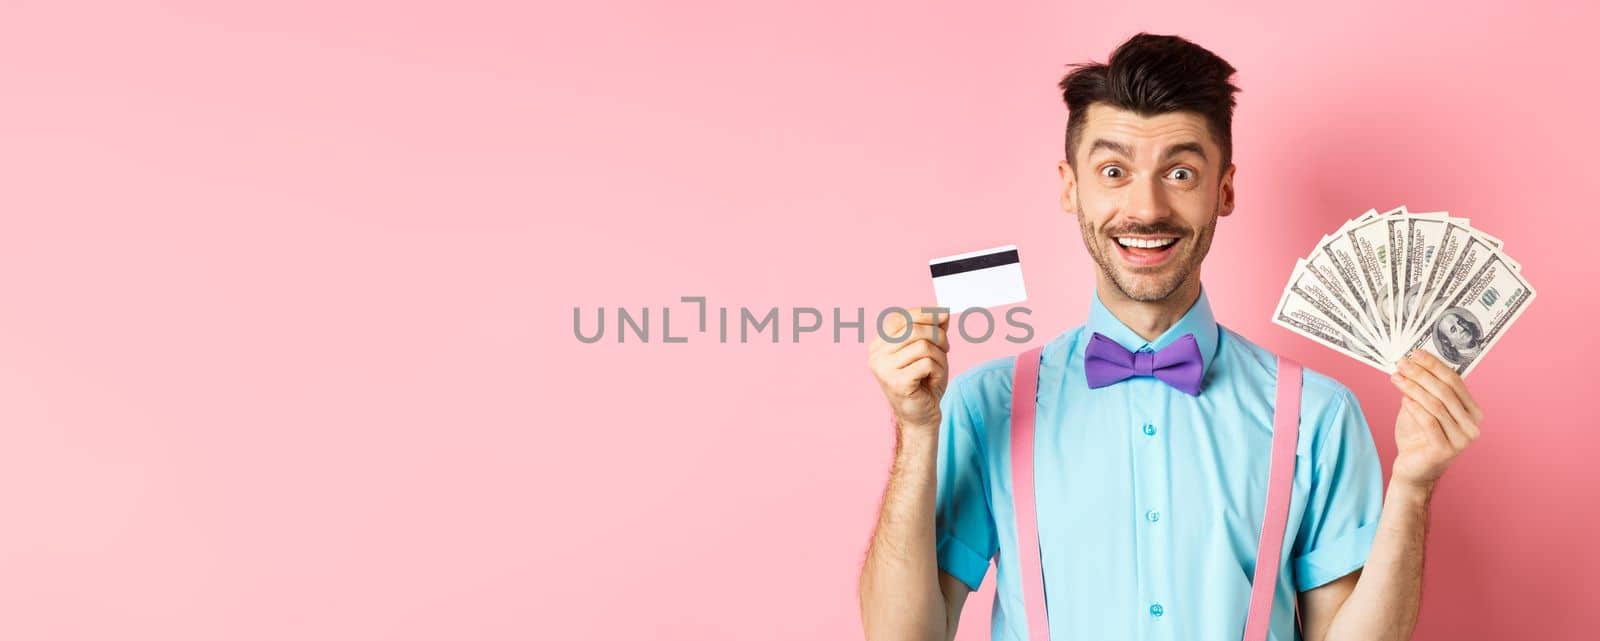 Cheerful caucasian man with moustache and bow-tie showing plastic credit card with money in dollars, smiling at camera, standing over pink background.